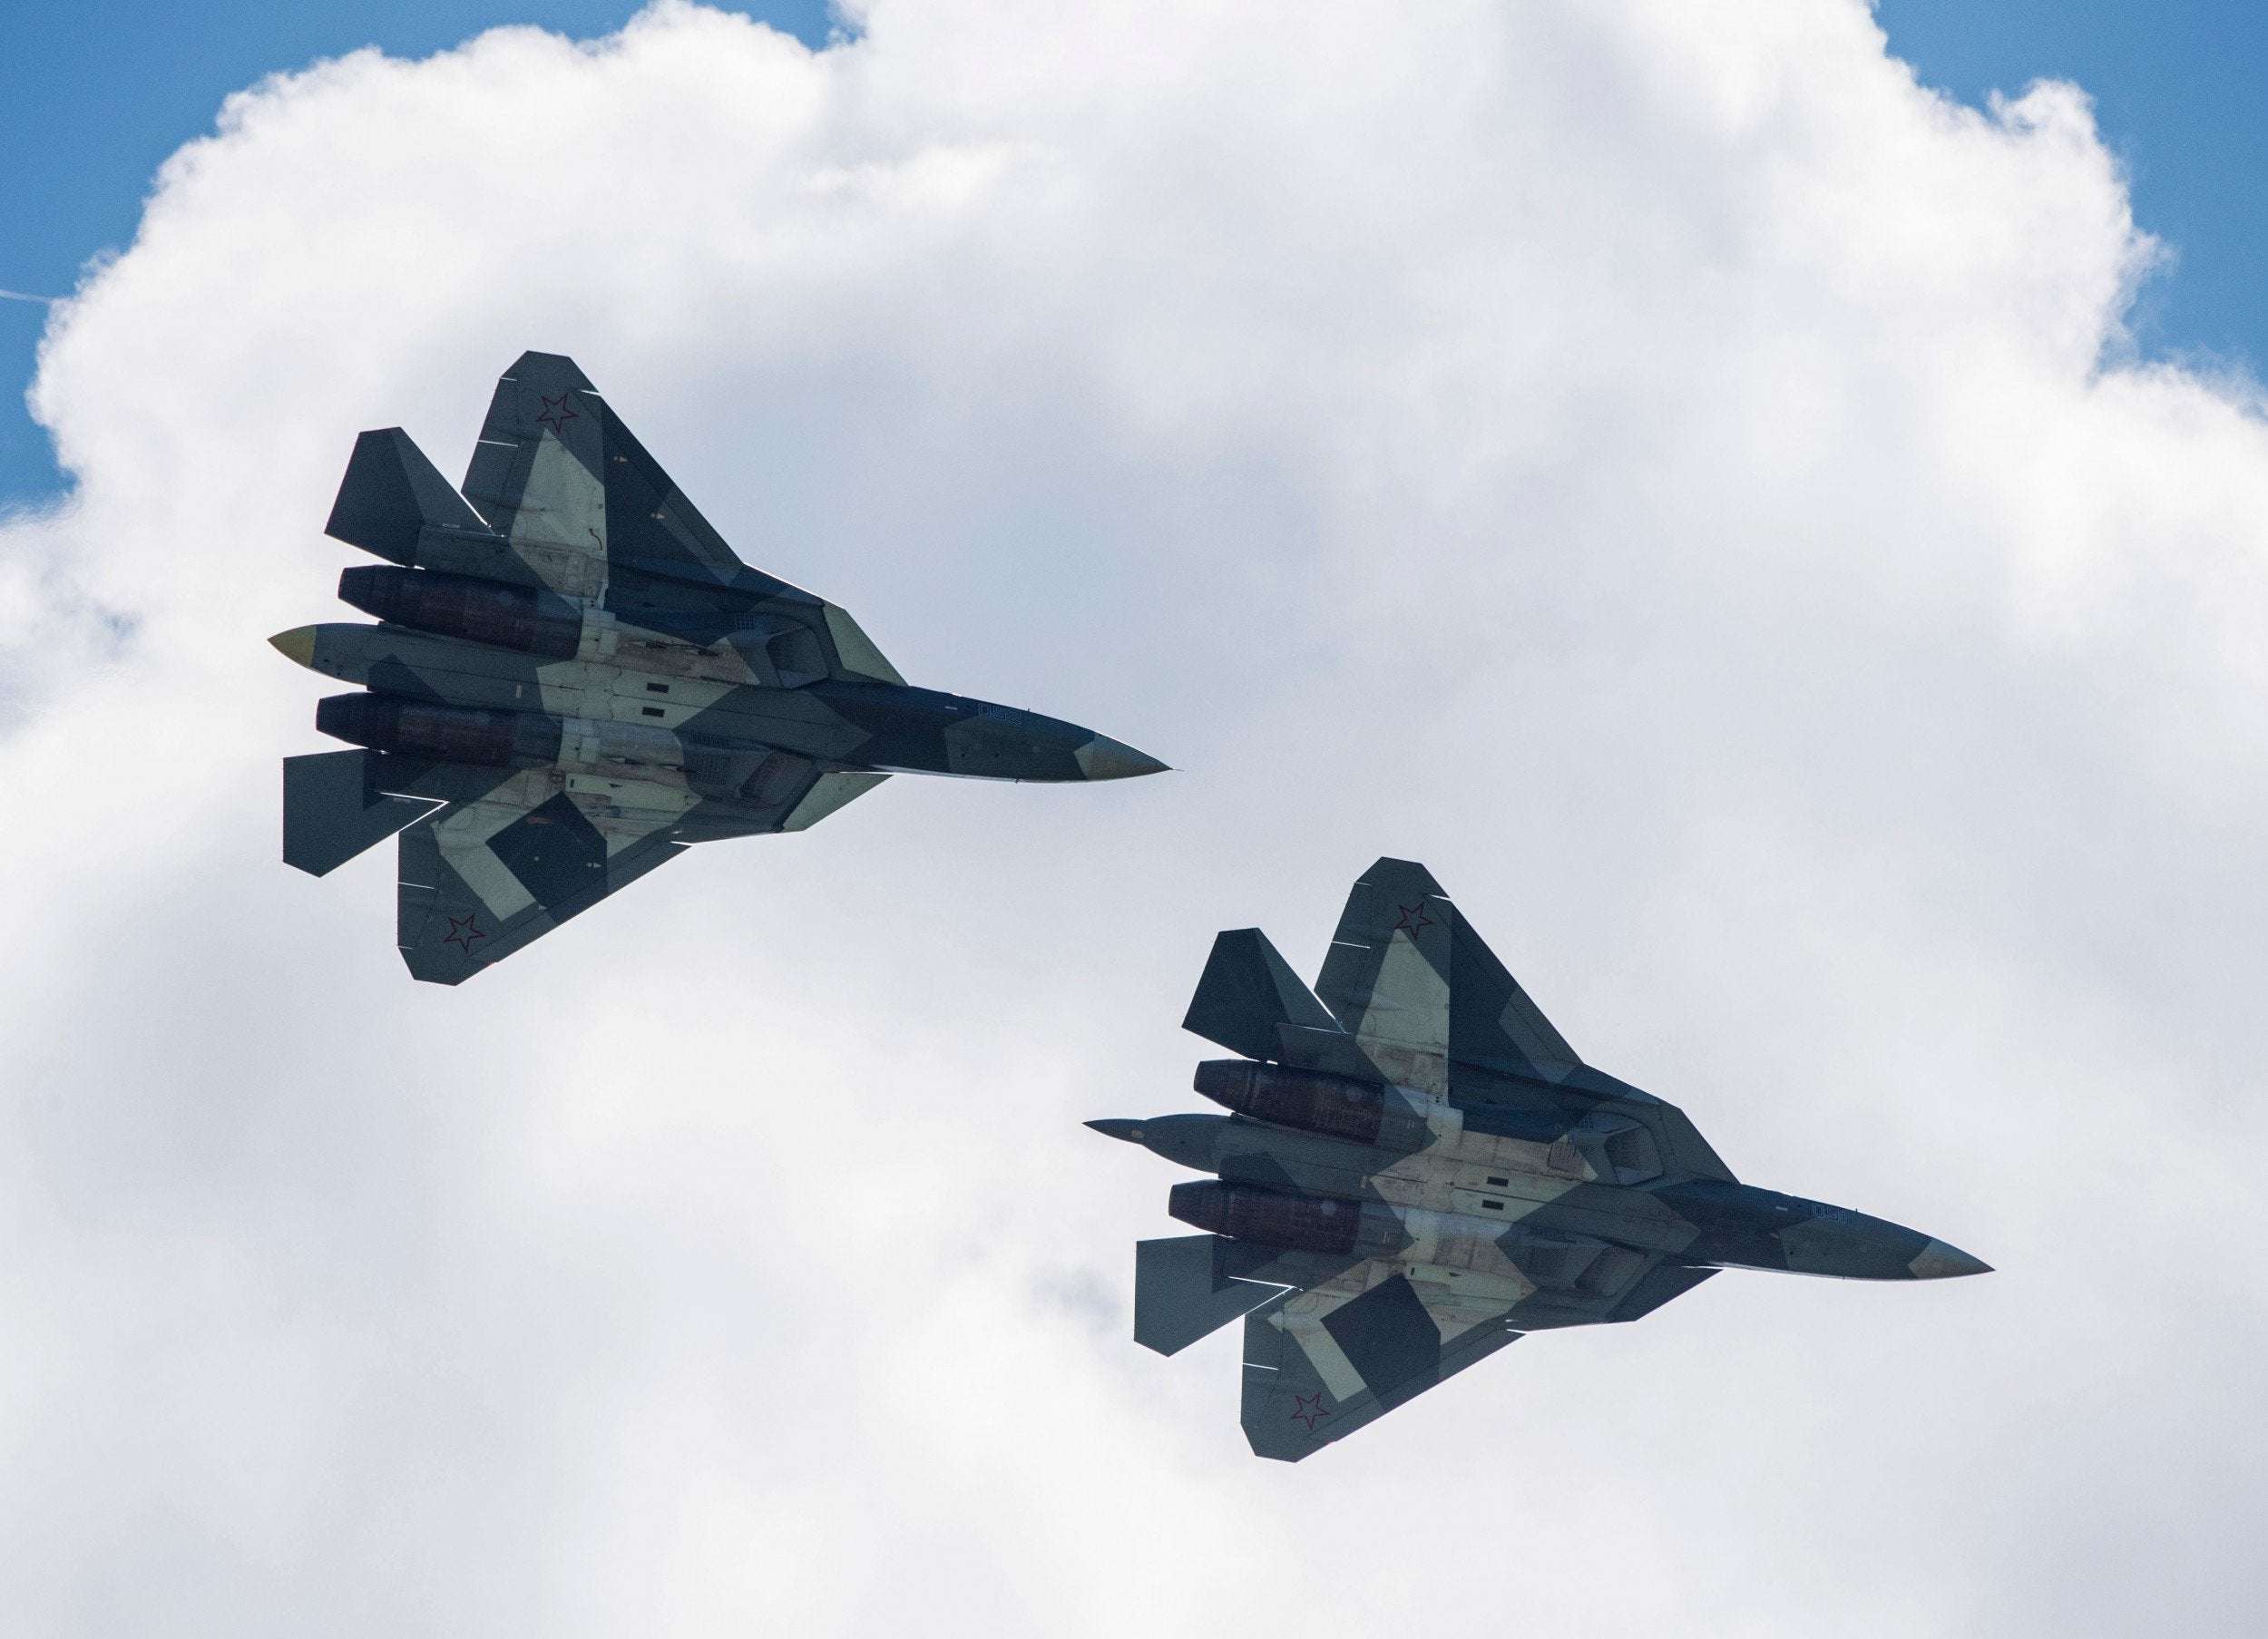 image for Russia Accidentally Shoots Down Their Own $36M Su-34 Bomber, Ukraine Claims